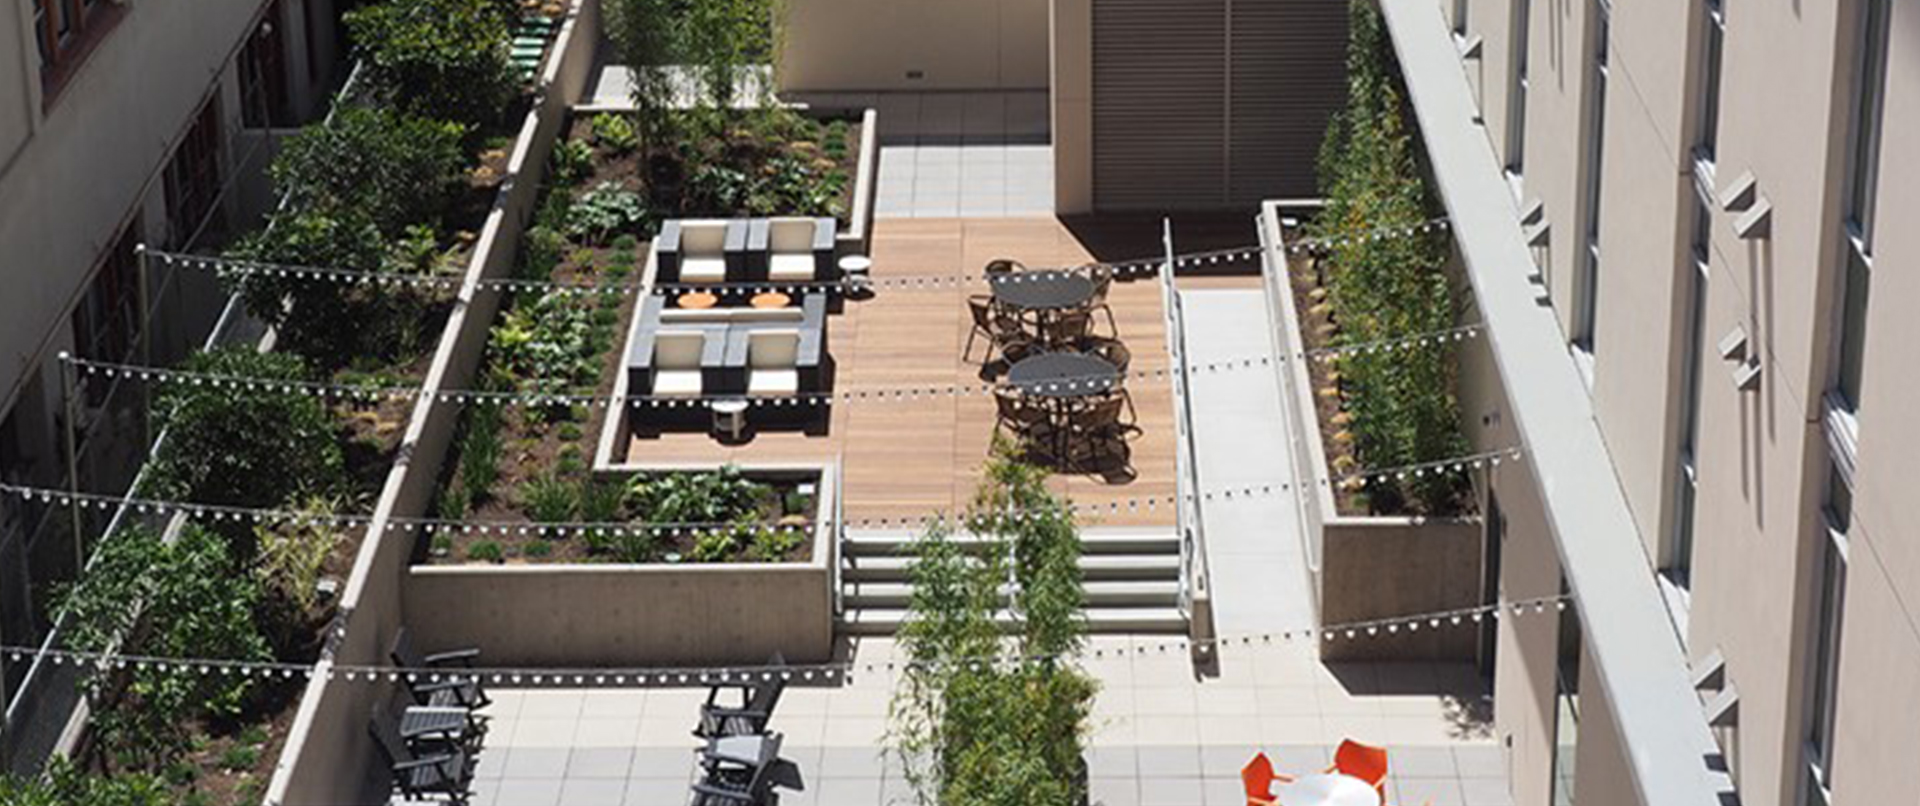 biophilic design for rooftop deck in apartment community